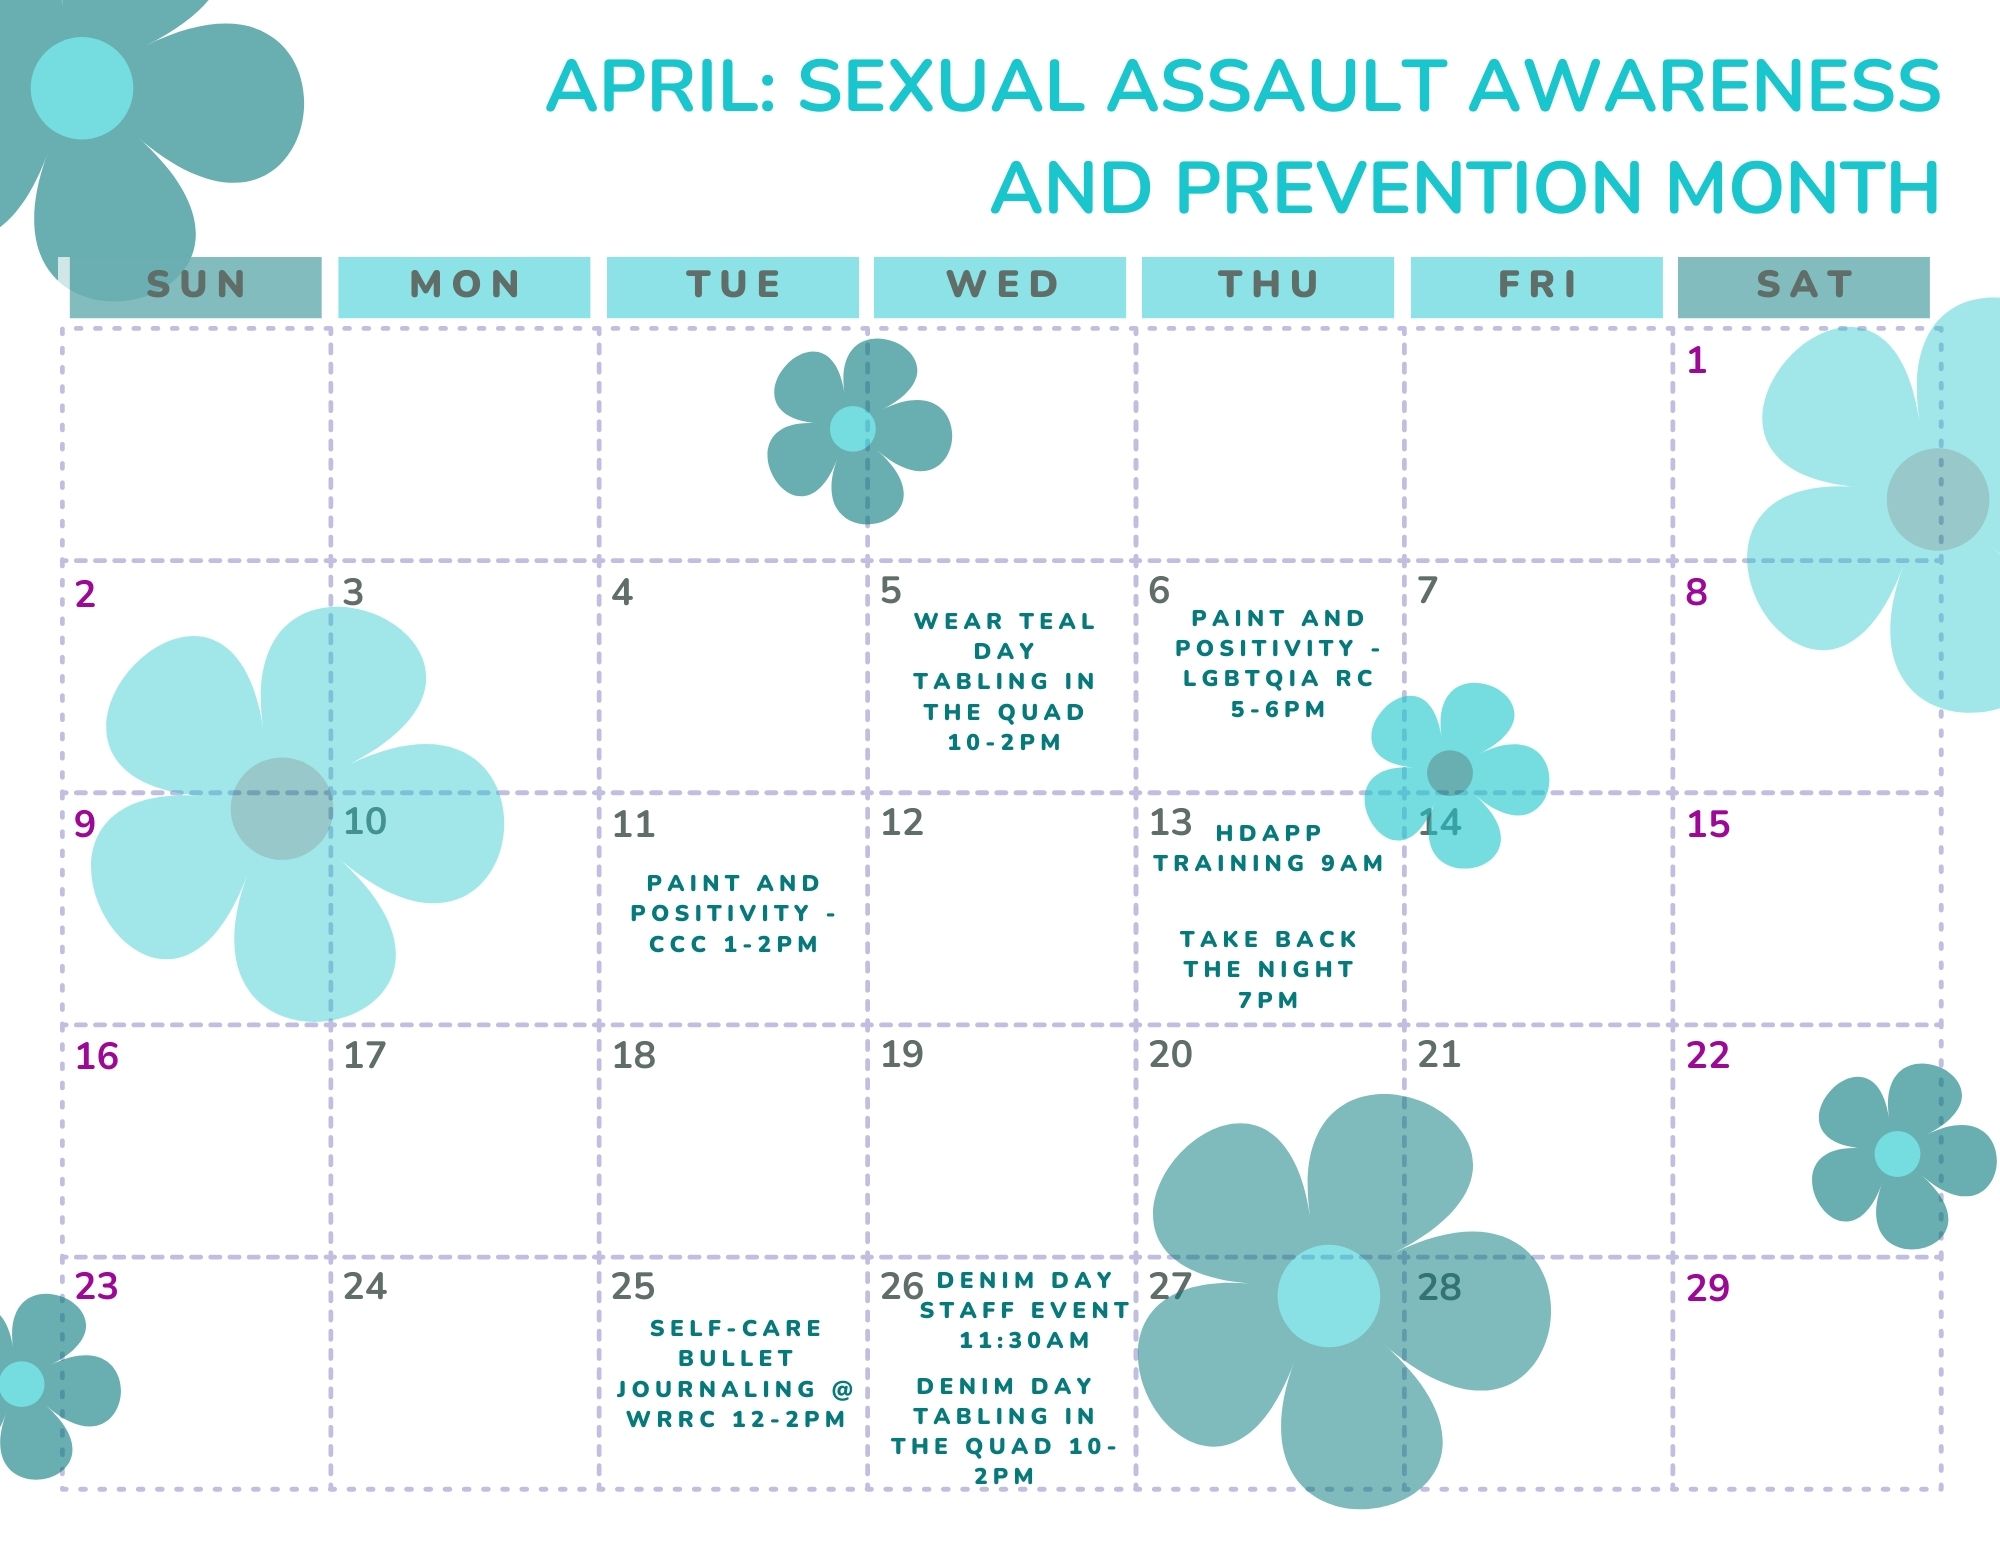 An April calendar for all Sexual Assault Awareness and Prevention Month events